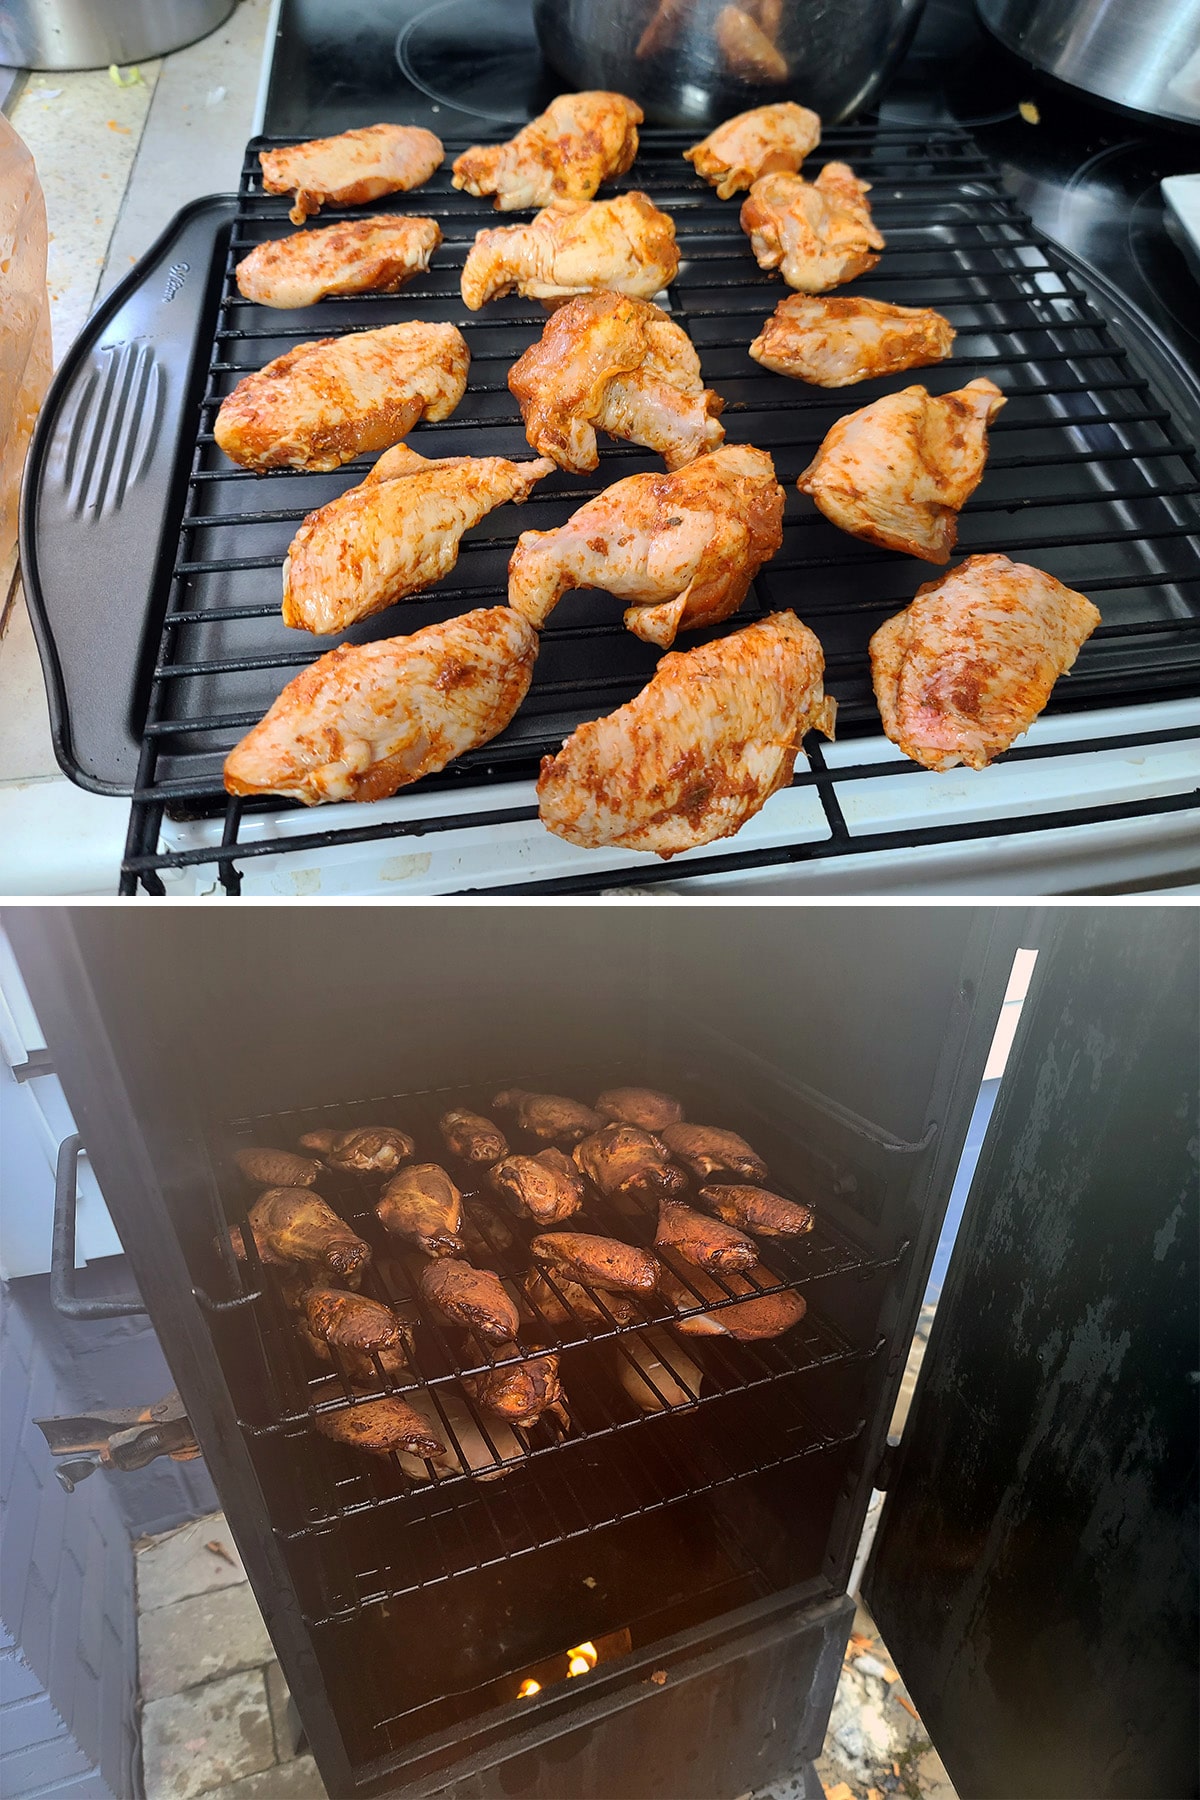 Raw chicken wings arranged on a smoking rack, then put in a smoker.